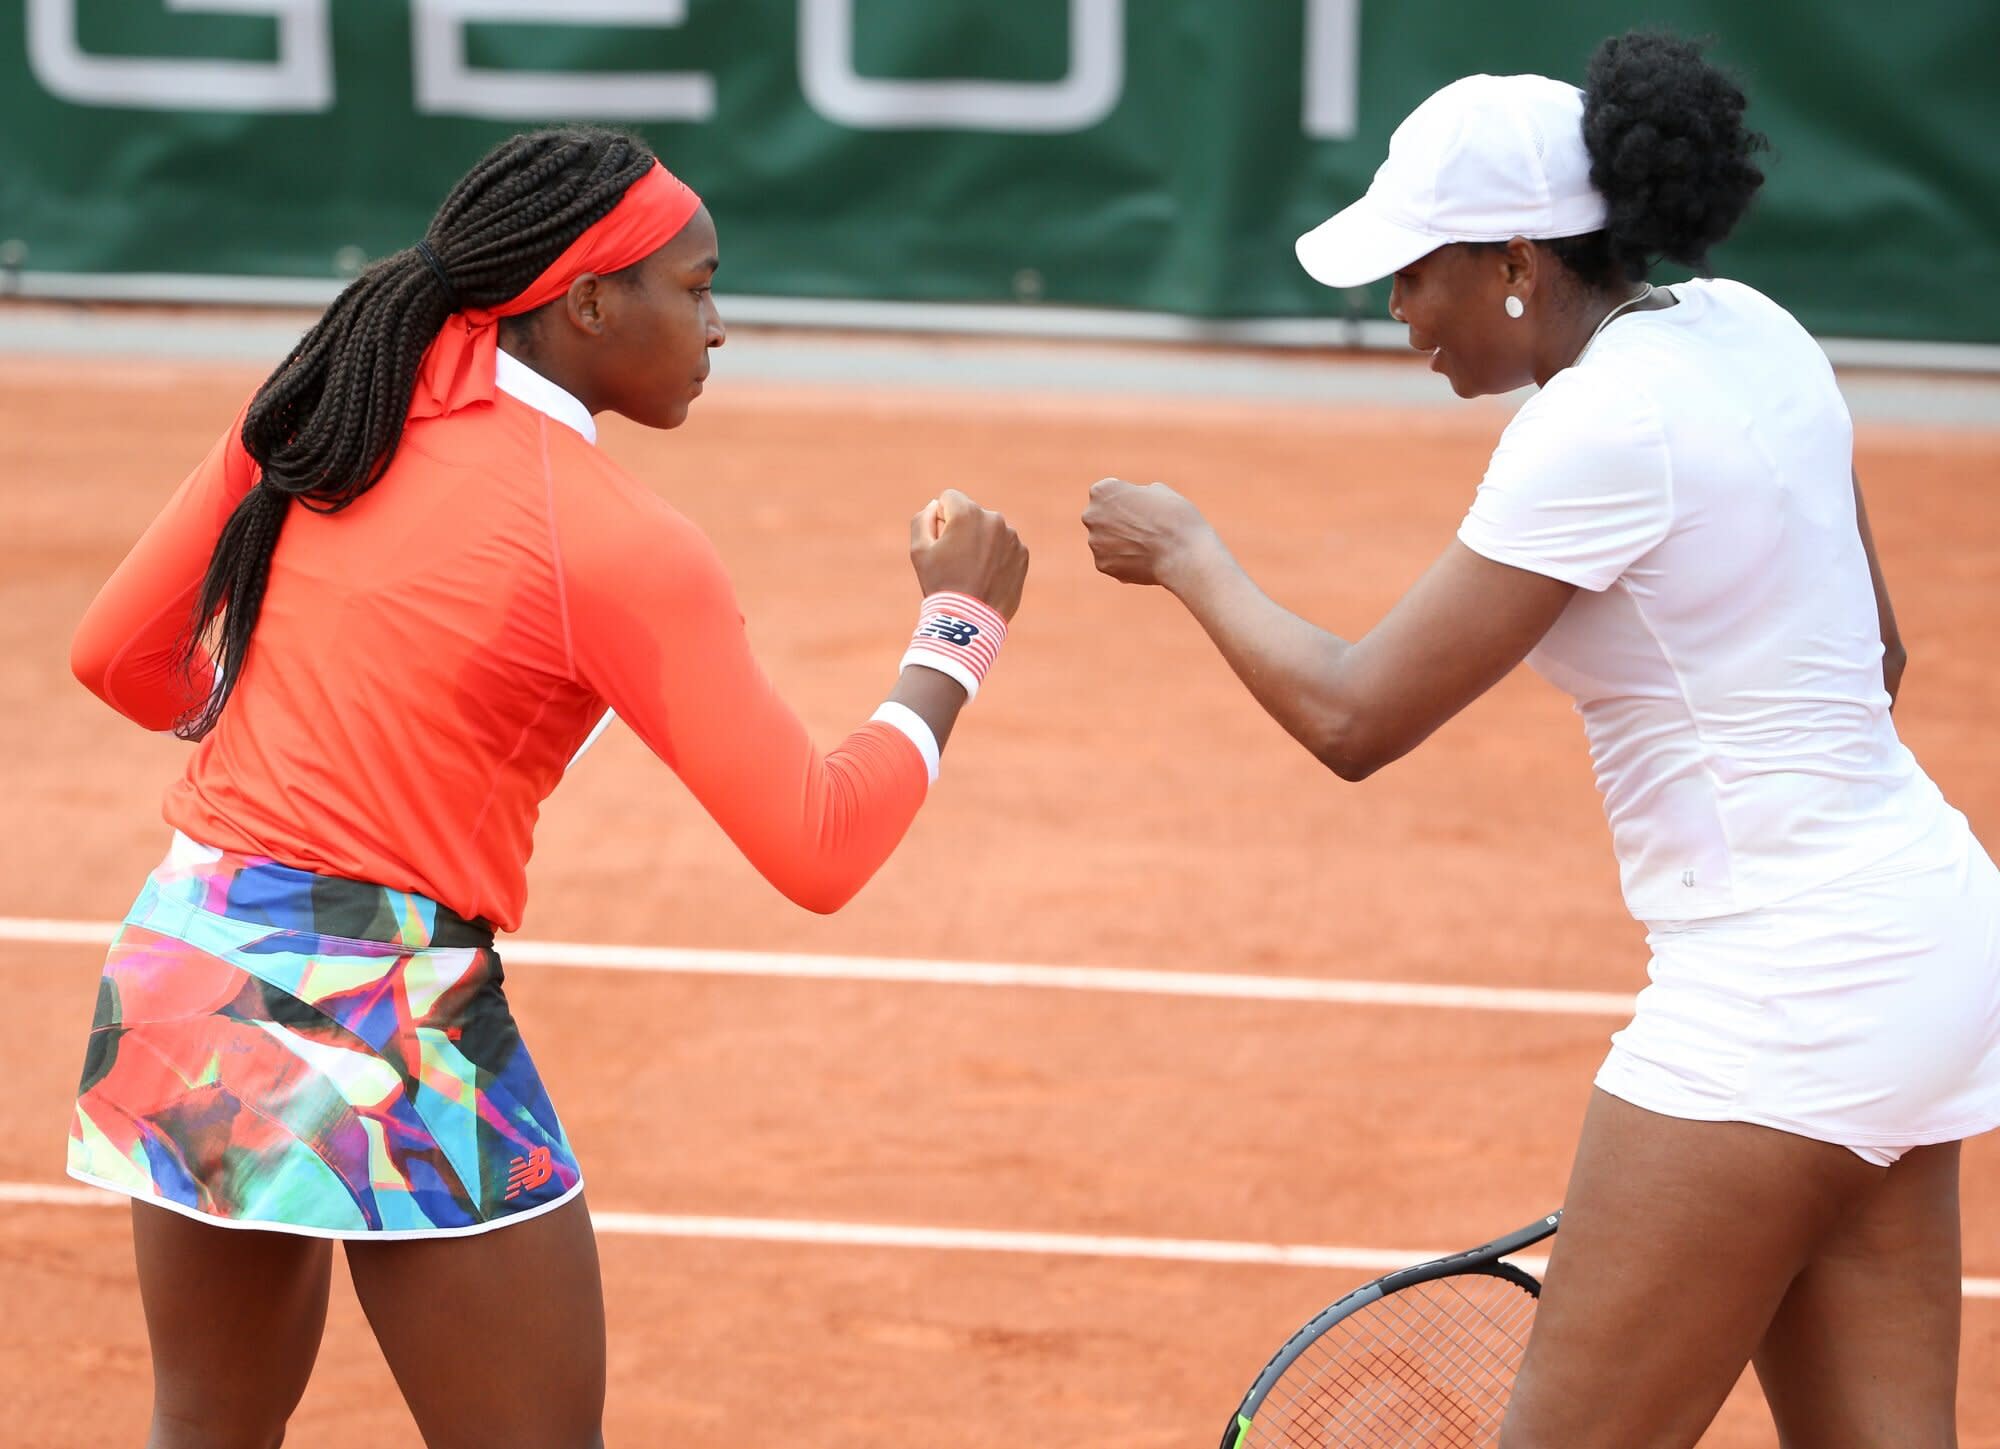 Venus Williams 'Glad' to Call Coco Gauff 'Partner' After First Round